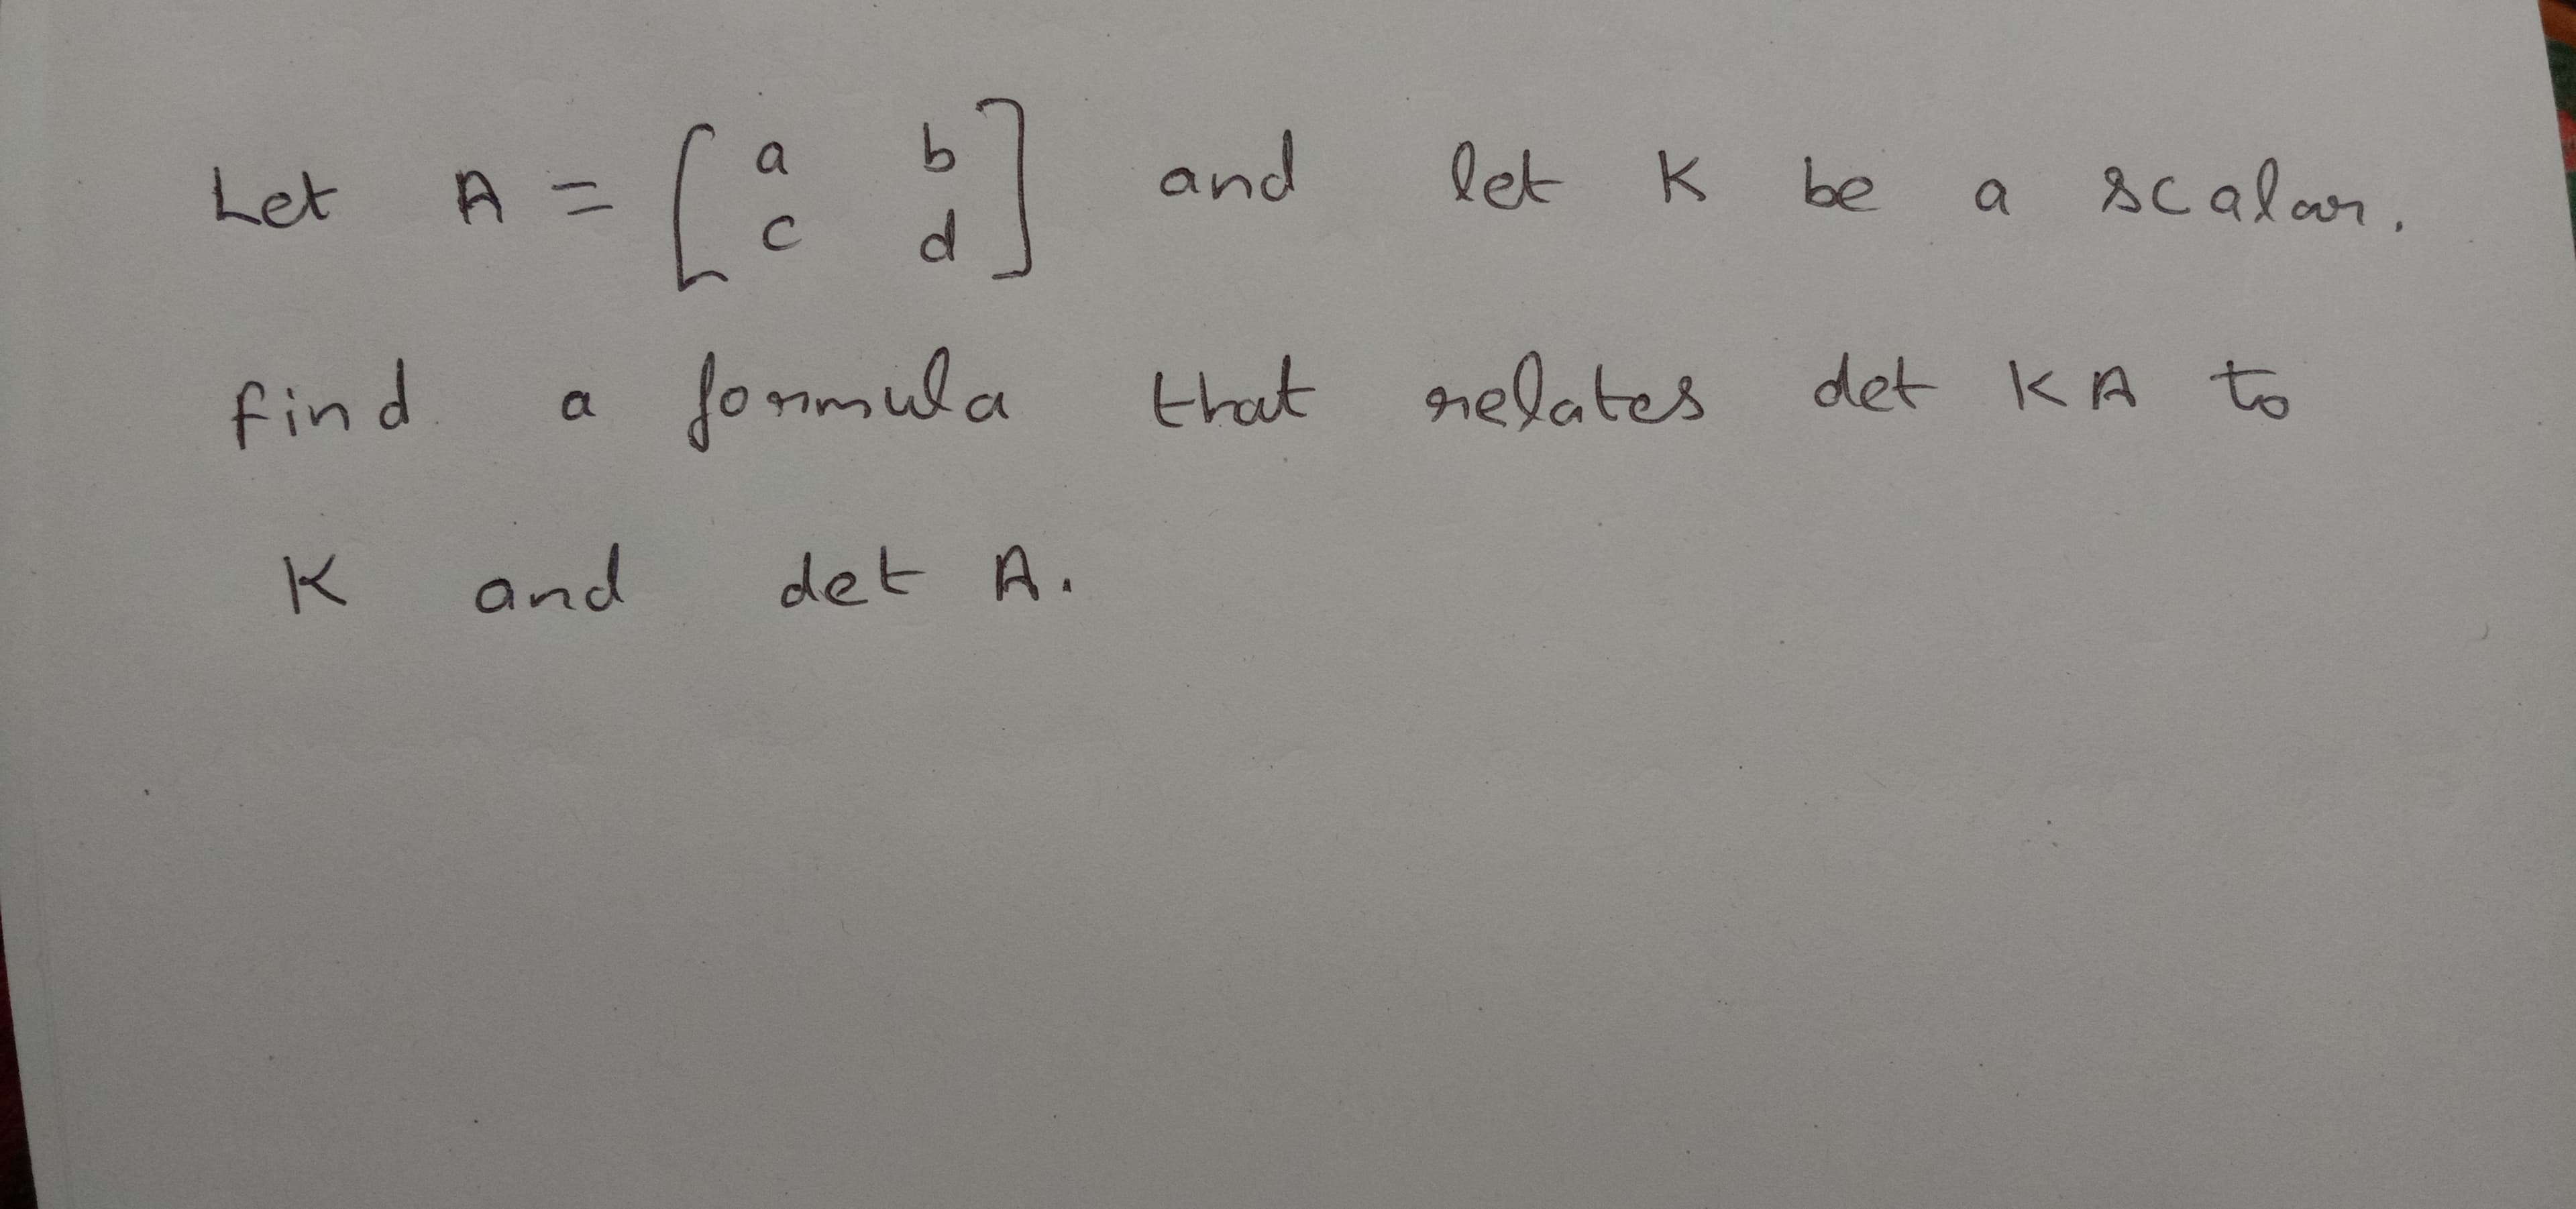 and
let K
K be
a scalar.
Let A =
fonmula
nelates det KA to
that
find. a
and
det A.
